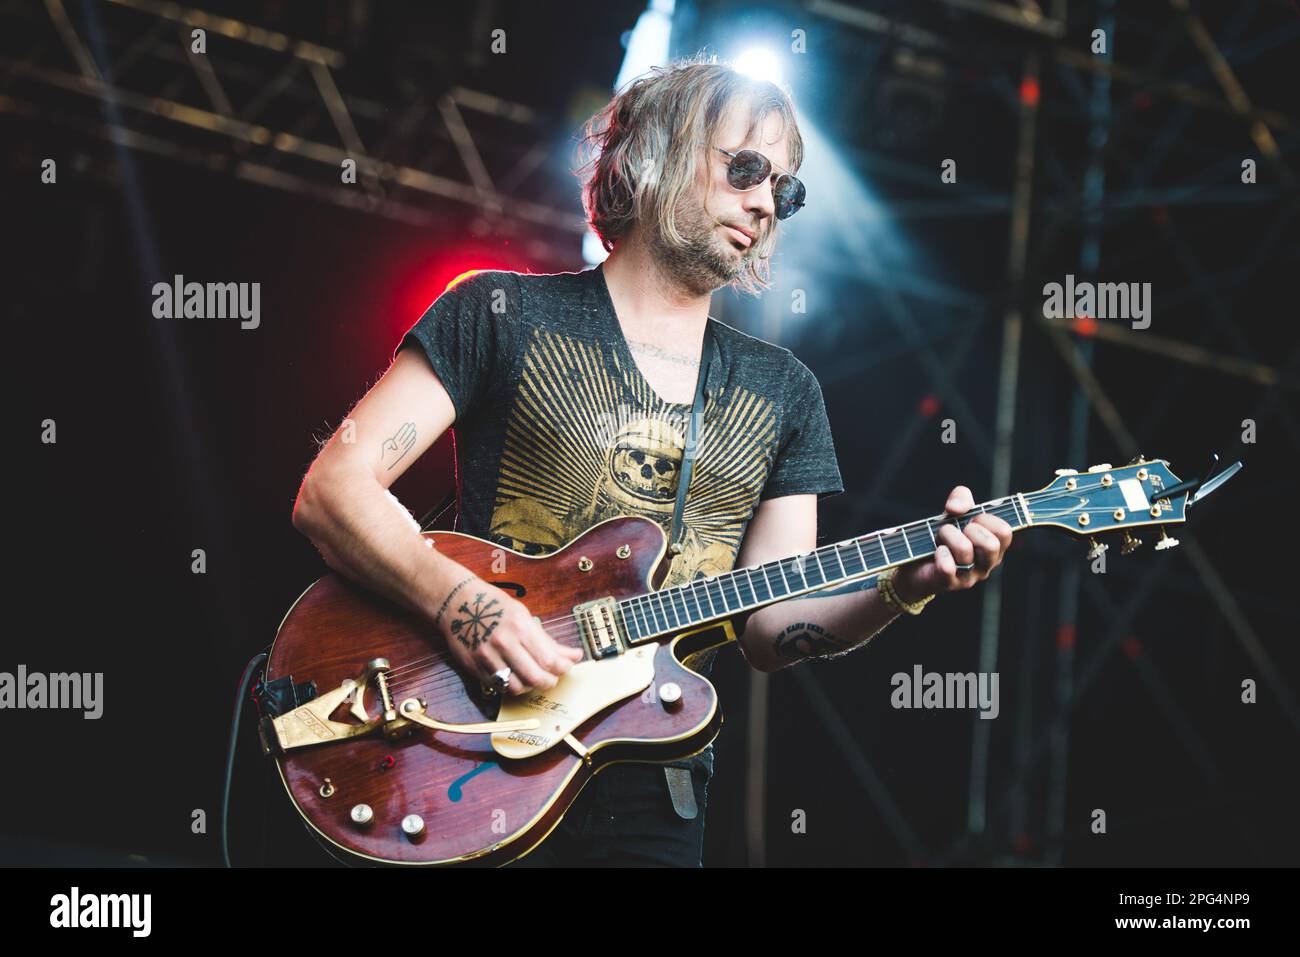 TODAYS Festival, TURIN, ITALY: Ryan Van Kriedt, of the American psychedelic rock band called “The The Brian Jonestown Massacre” (BJM) performing live on stage at the Todays Festival held in Torino. Stock Photo